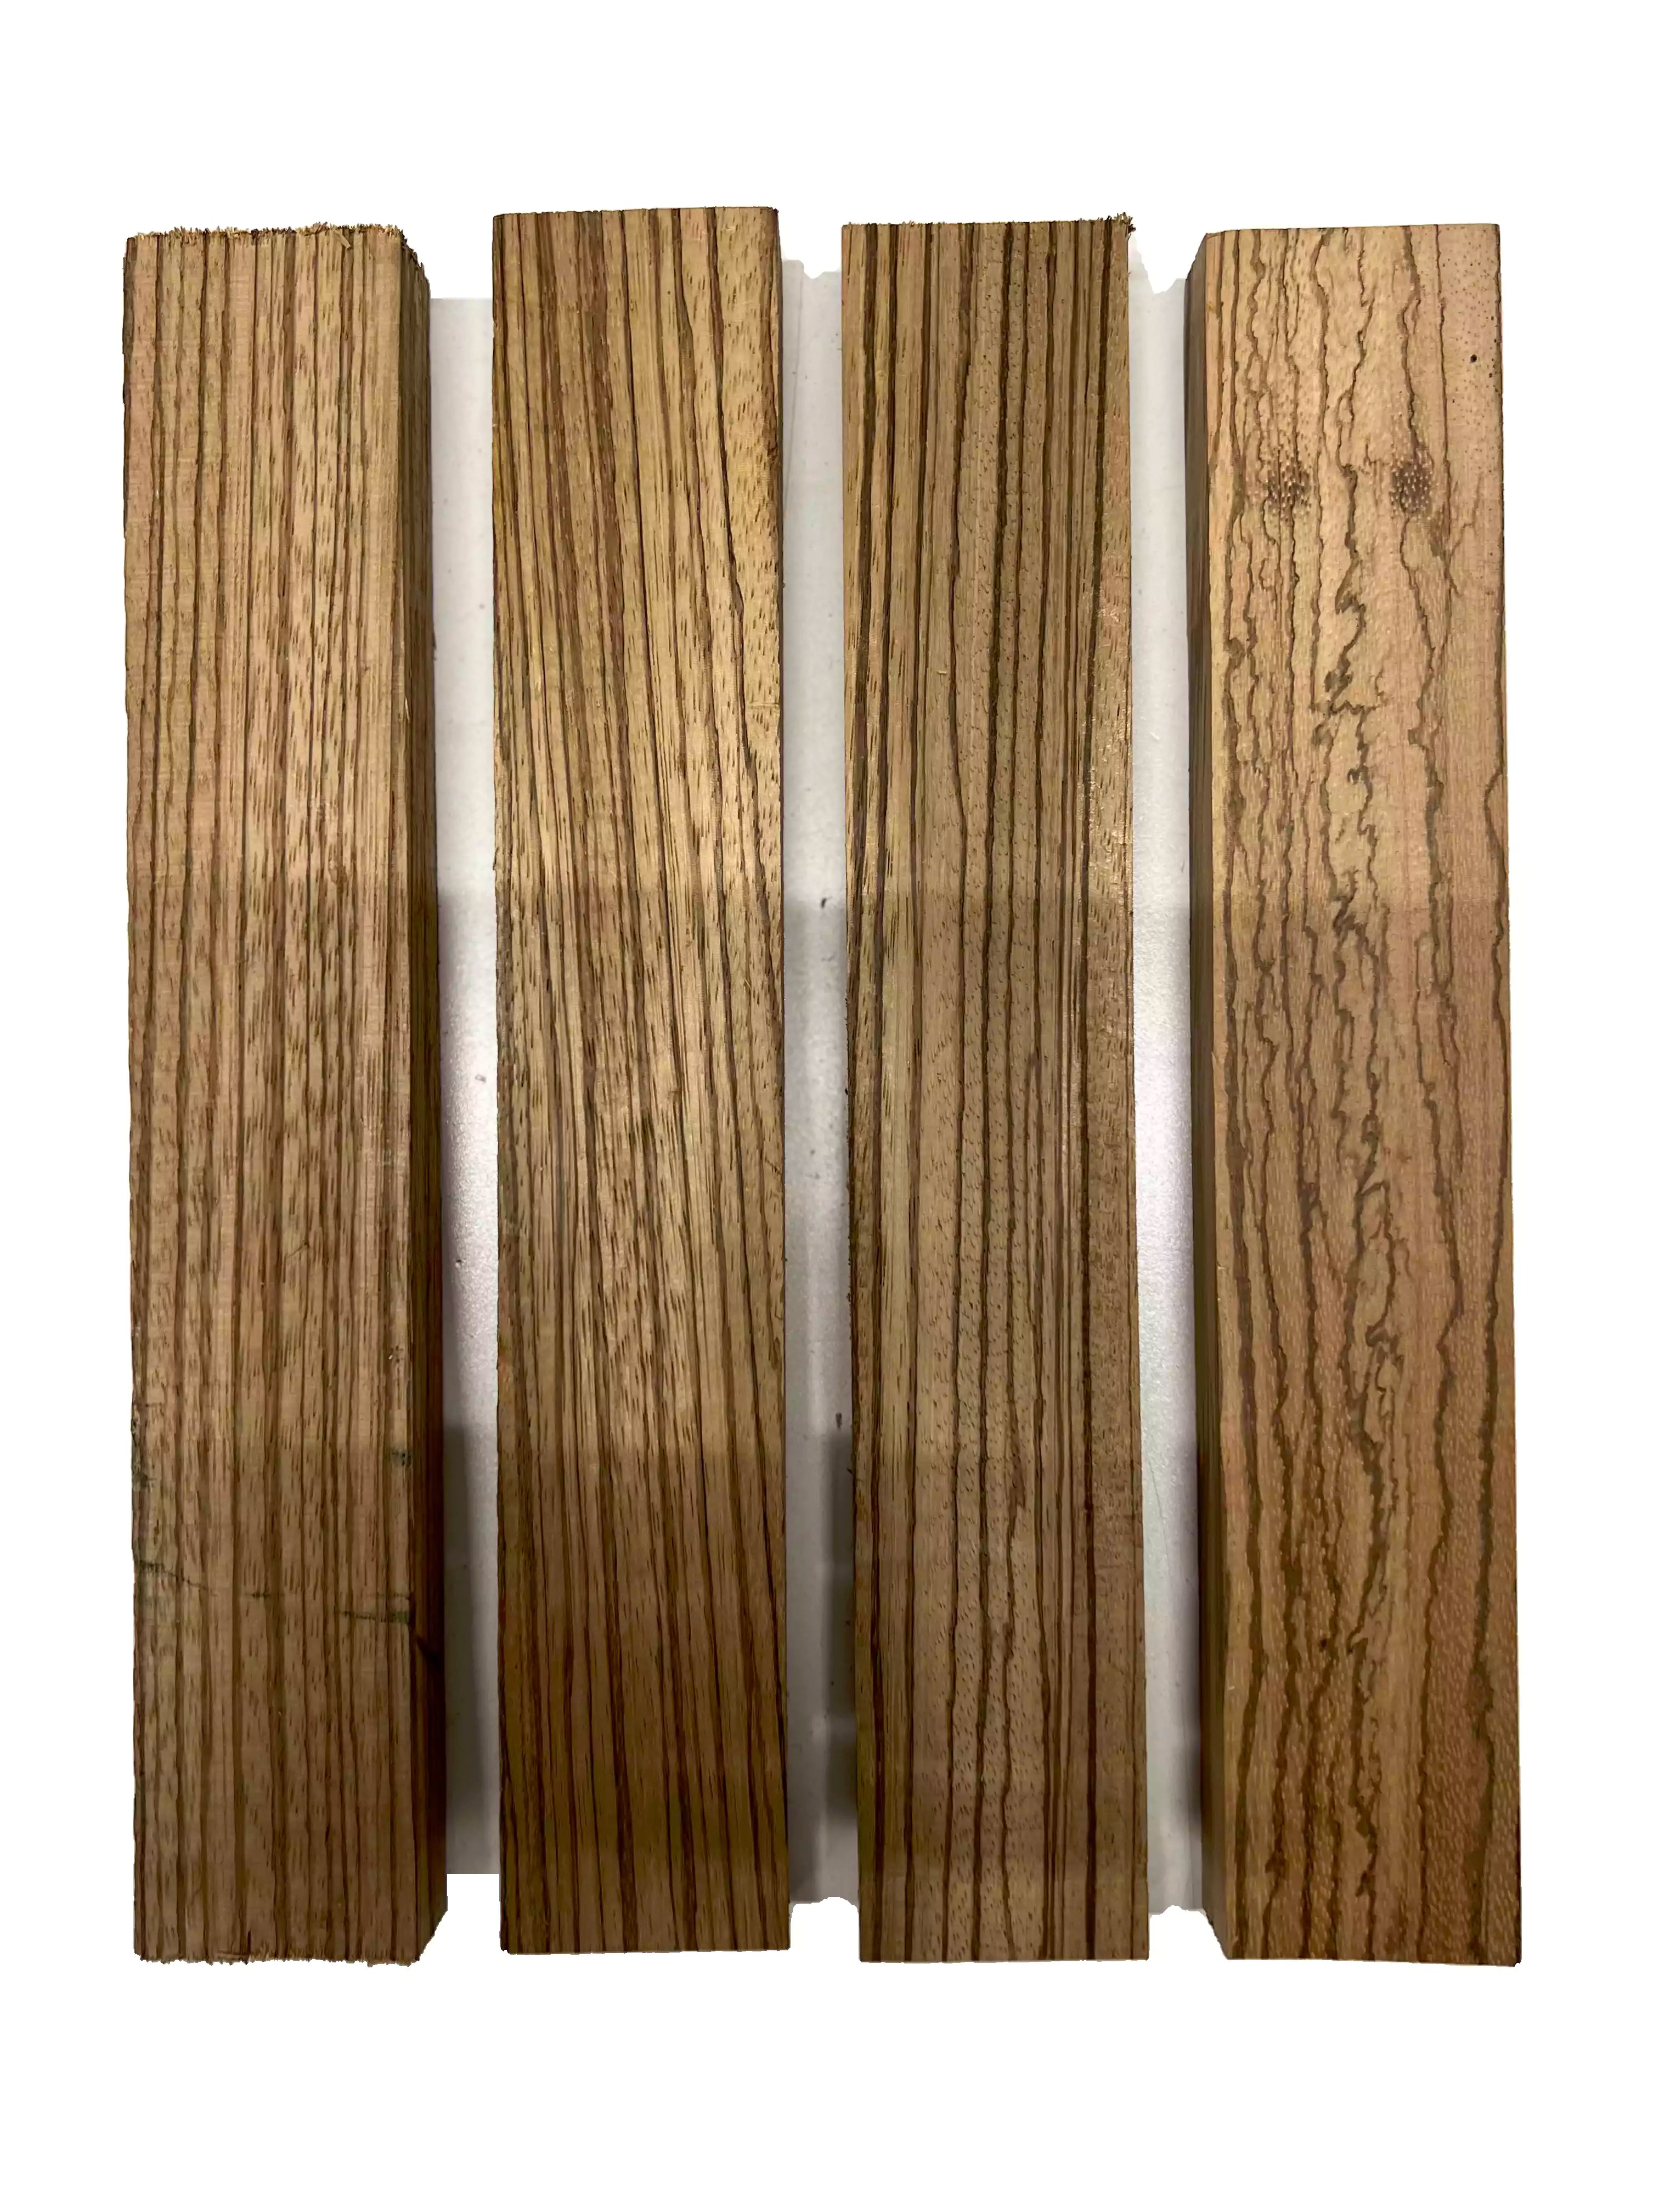 Pack of 4, Zebrawood Thin Stock Three Dimensional Lumber Board 12&quot; x 2&quot; x 3/4&quot; 